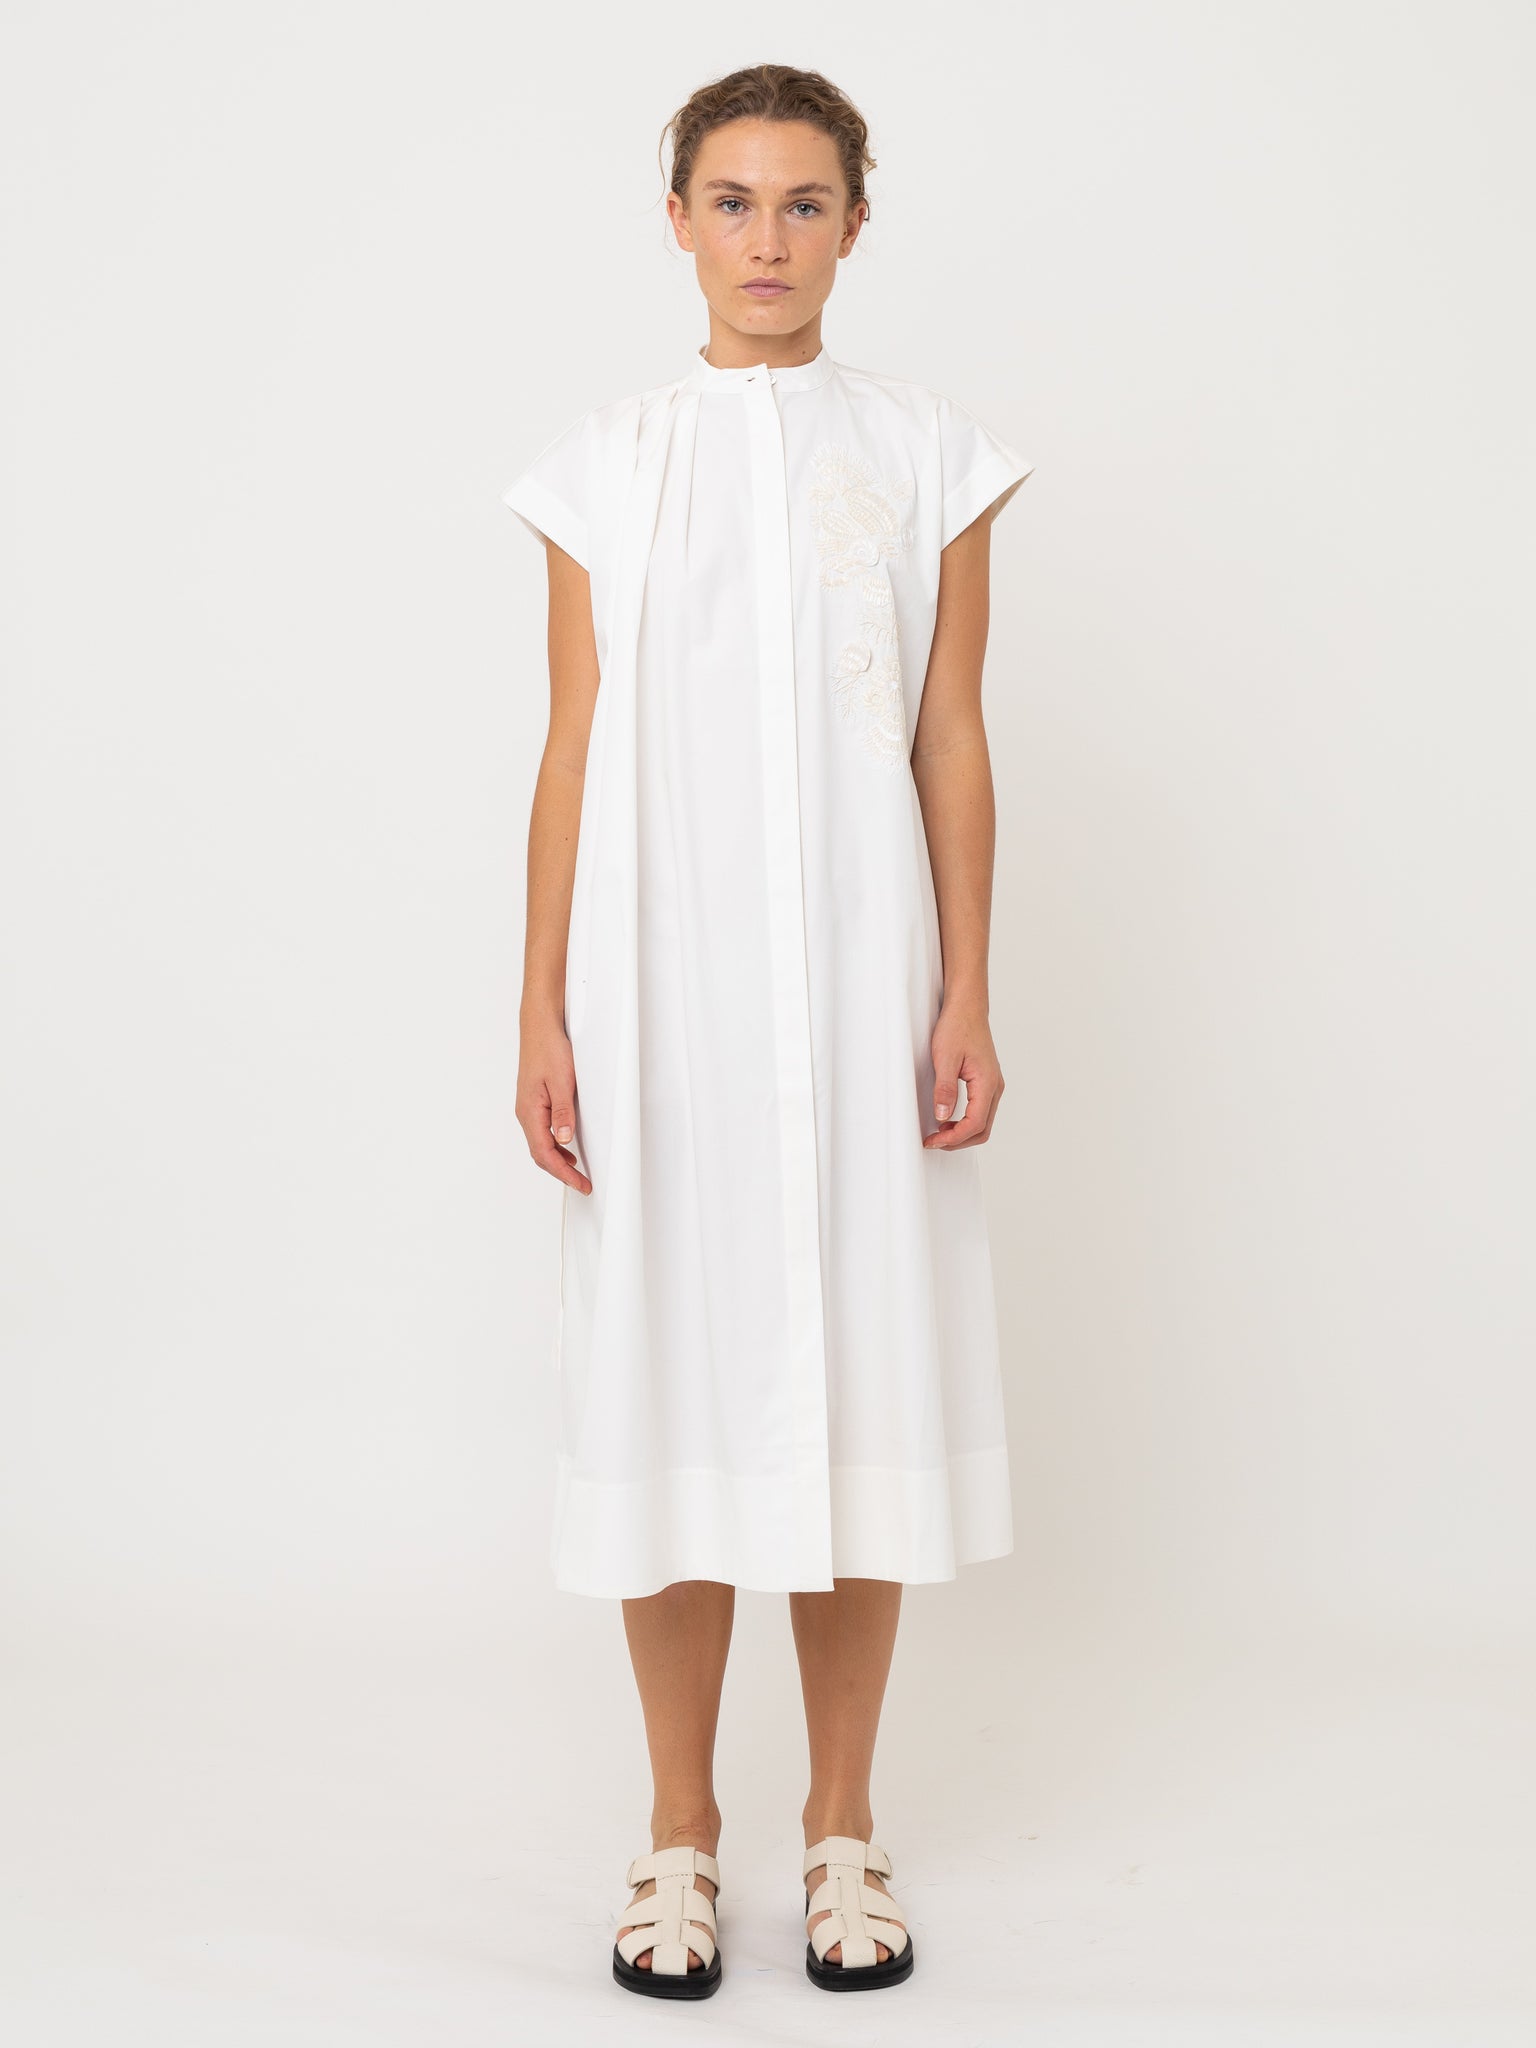 Embroidered Dress White Cotton